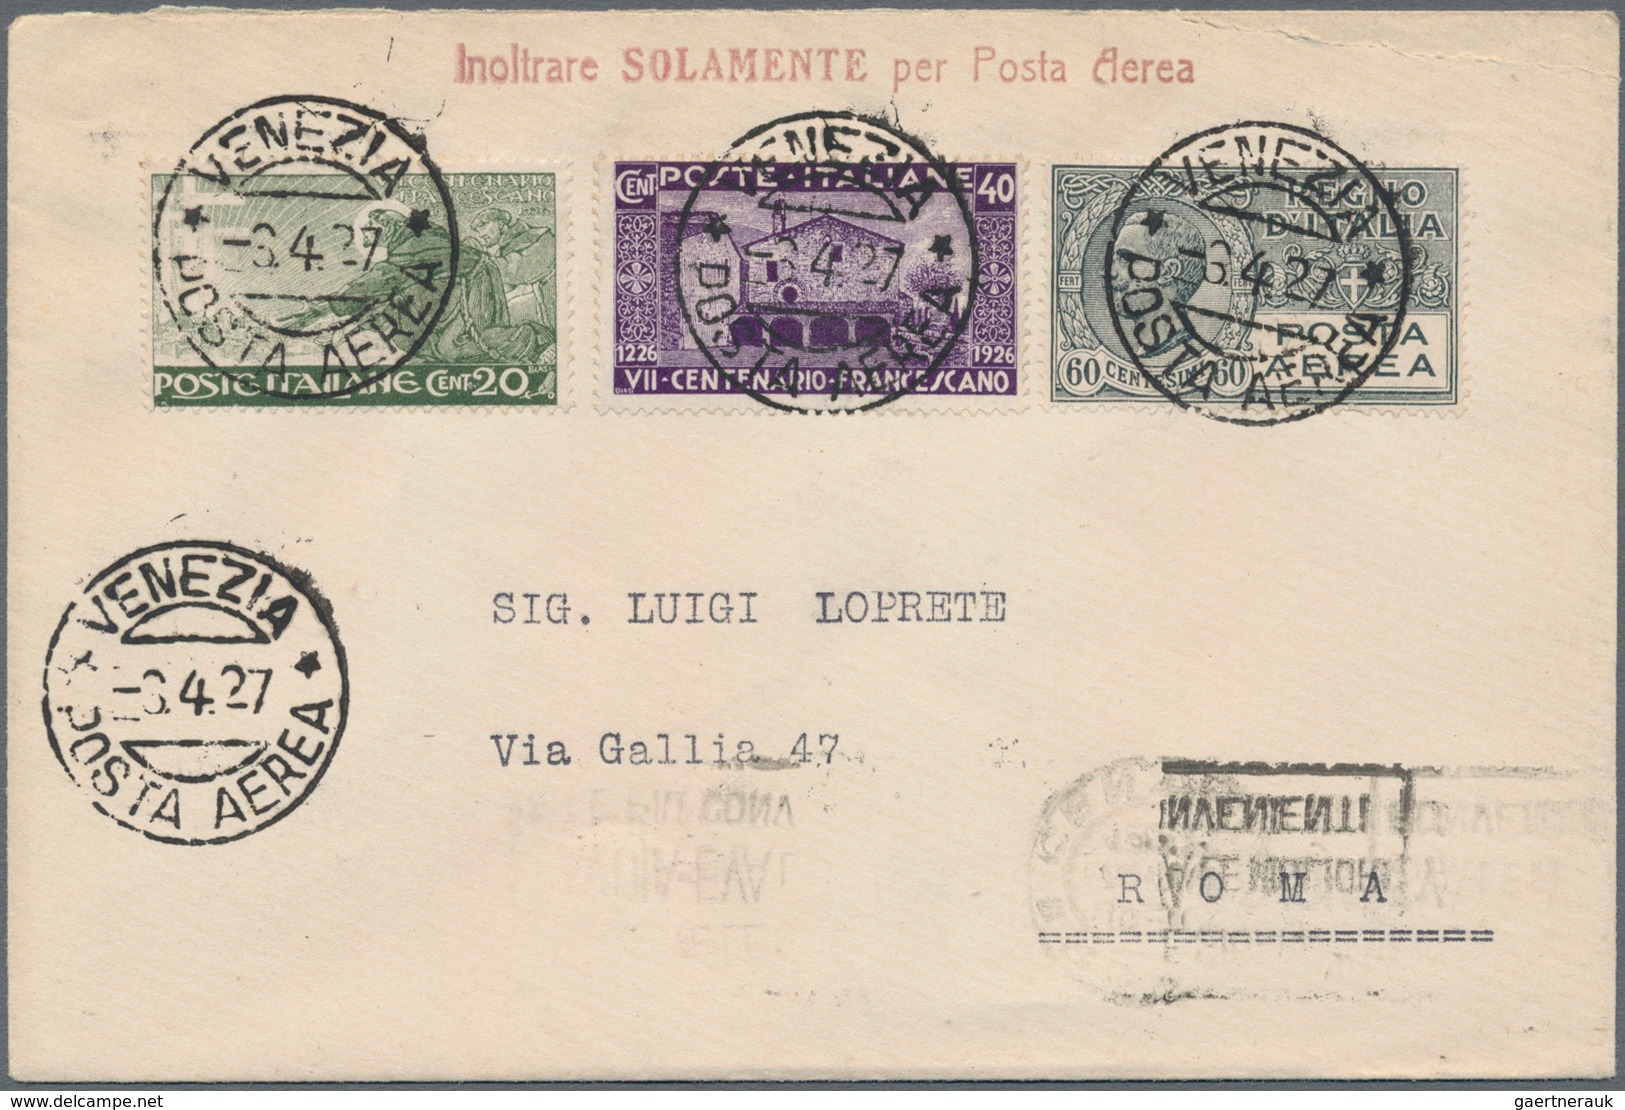 Flugpost Europa: 1927, Italy. Transadriatica Airmail Cover From "Venice 6.4.27" To Rome. Fine. - Europe (Other)